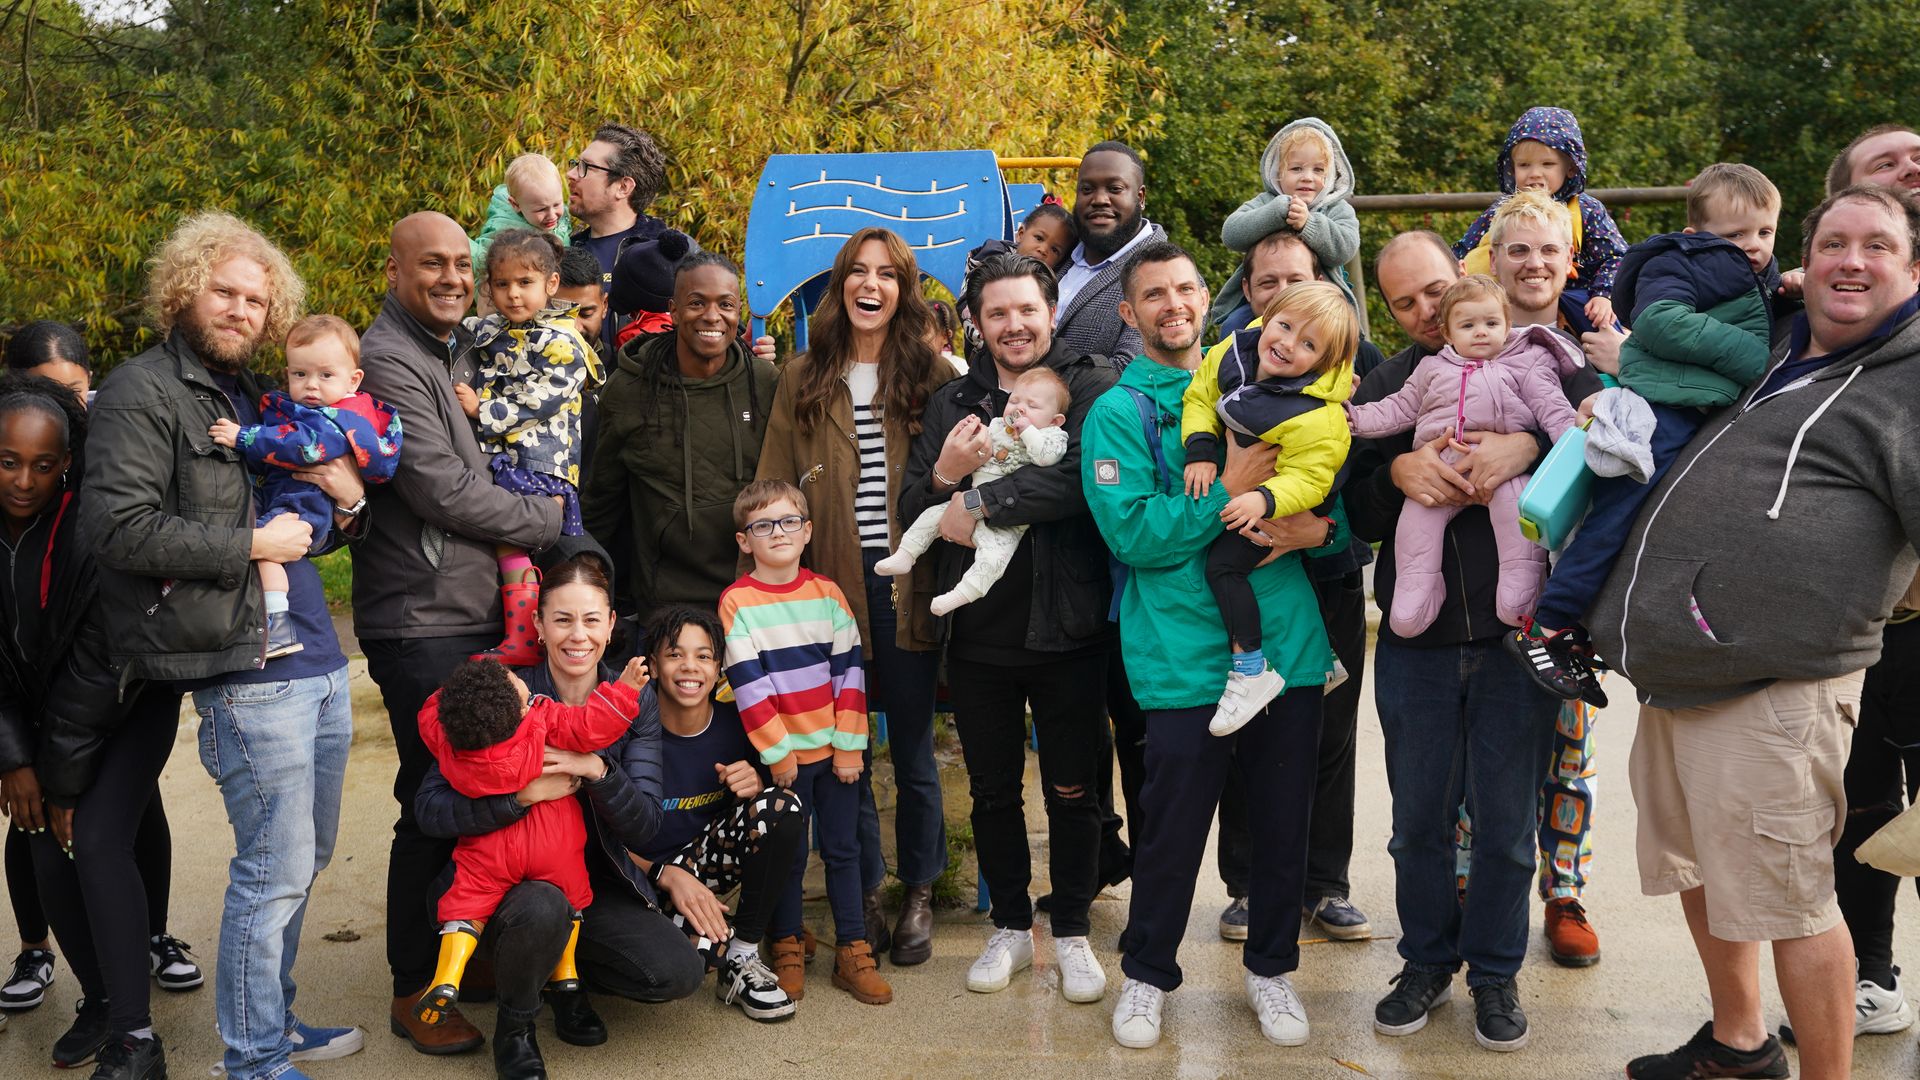 Kate Middleton poses with Dadvengers group in North London